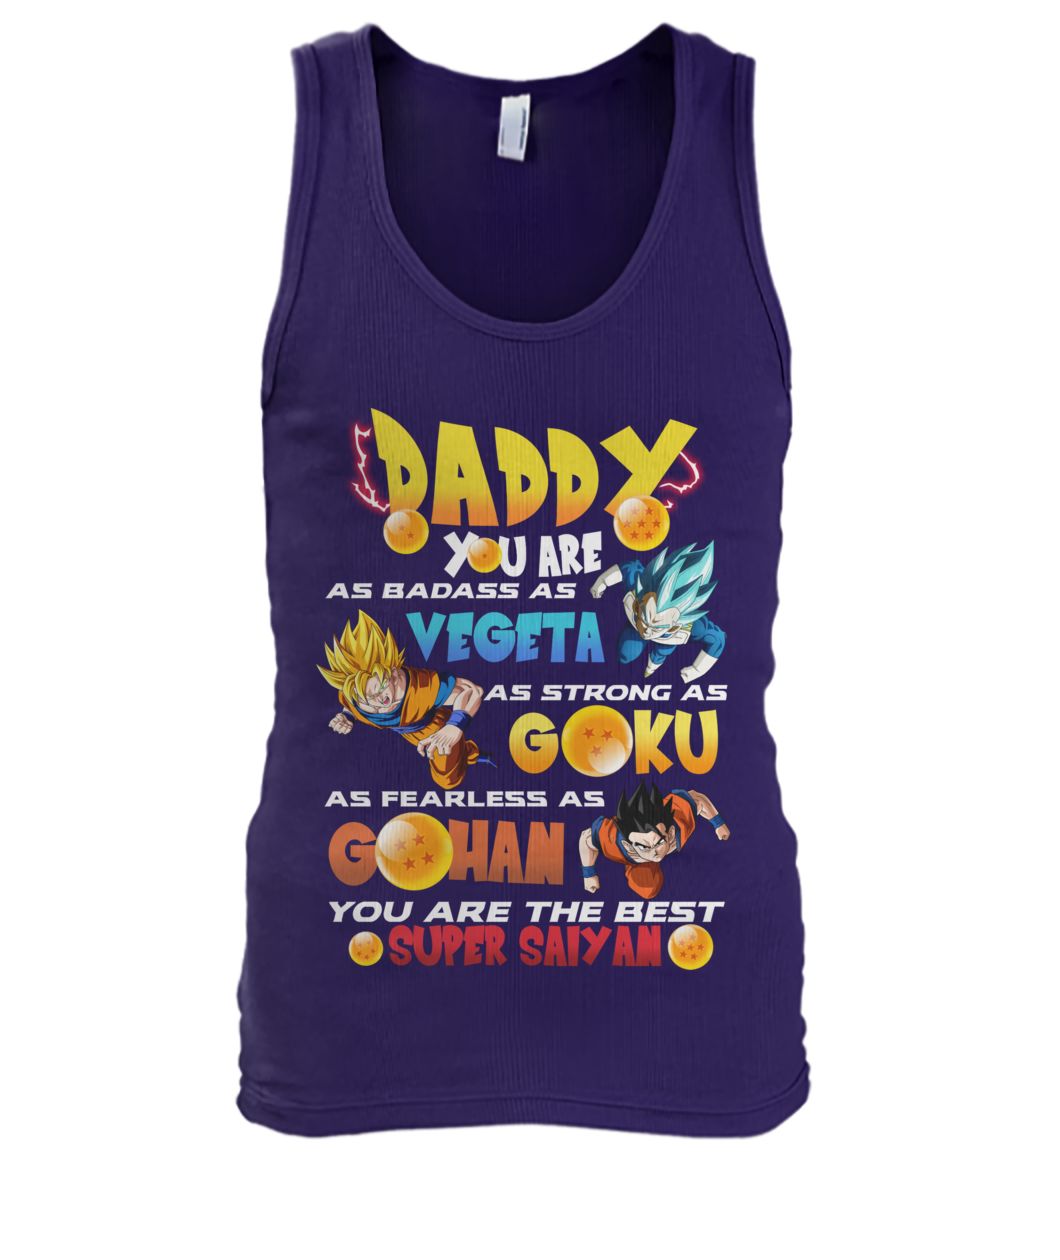 Daddy you are as badass as vegeta as strong as goku as fearless as gohan you are the best super saiyan men's tank top